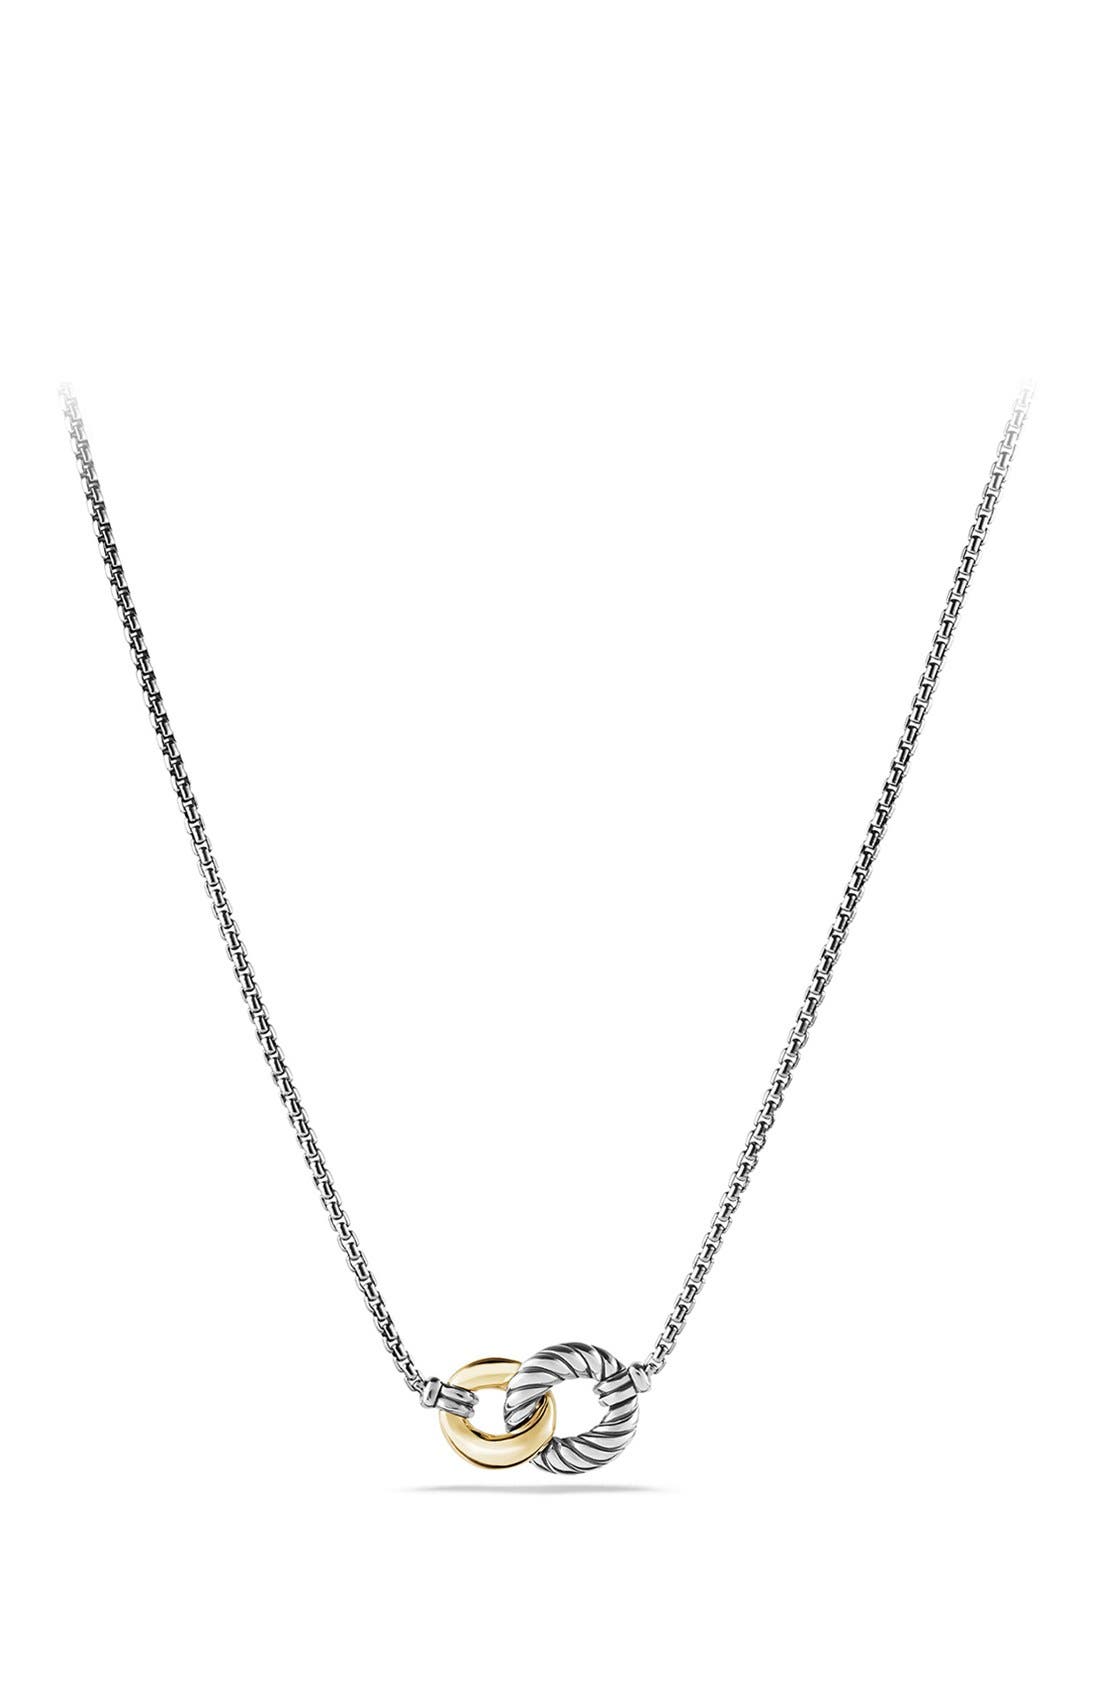 Pendant Necklace Two Tone Silver Gold